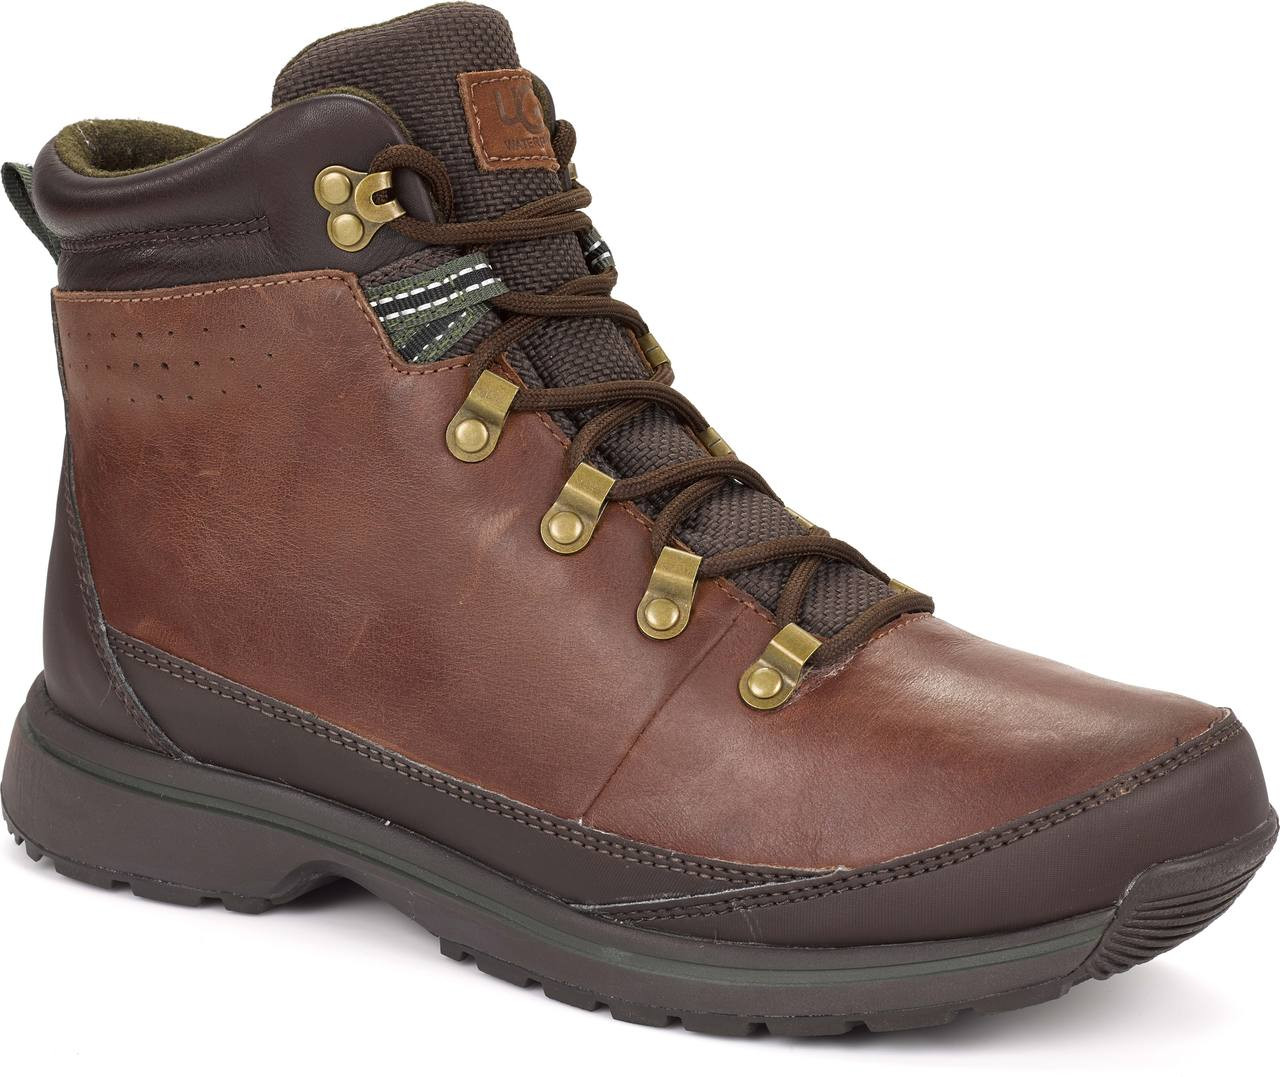 Ugg Boots Hiking Sole Tall | Division of Global Affairs